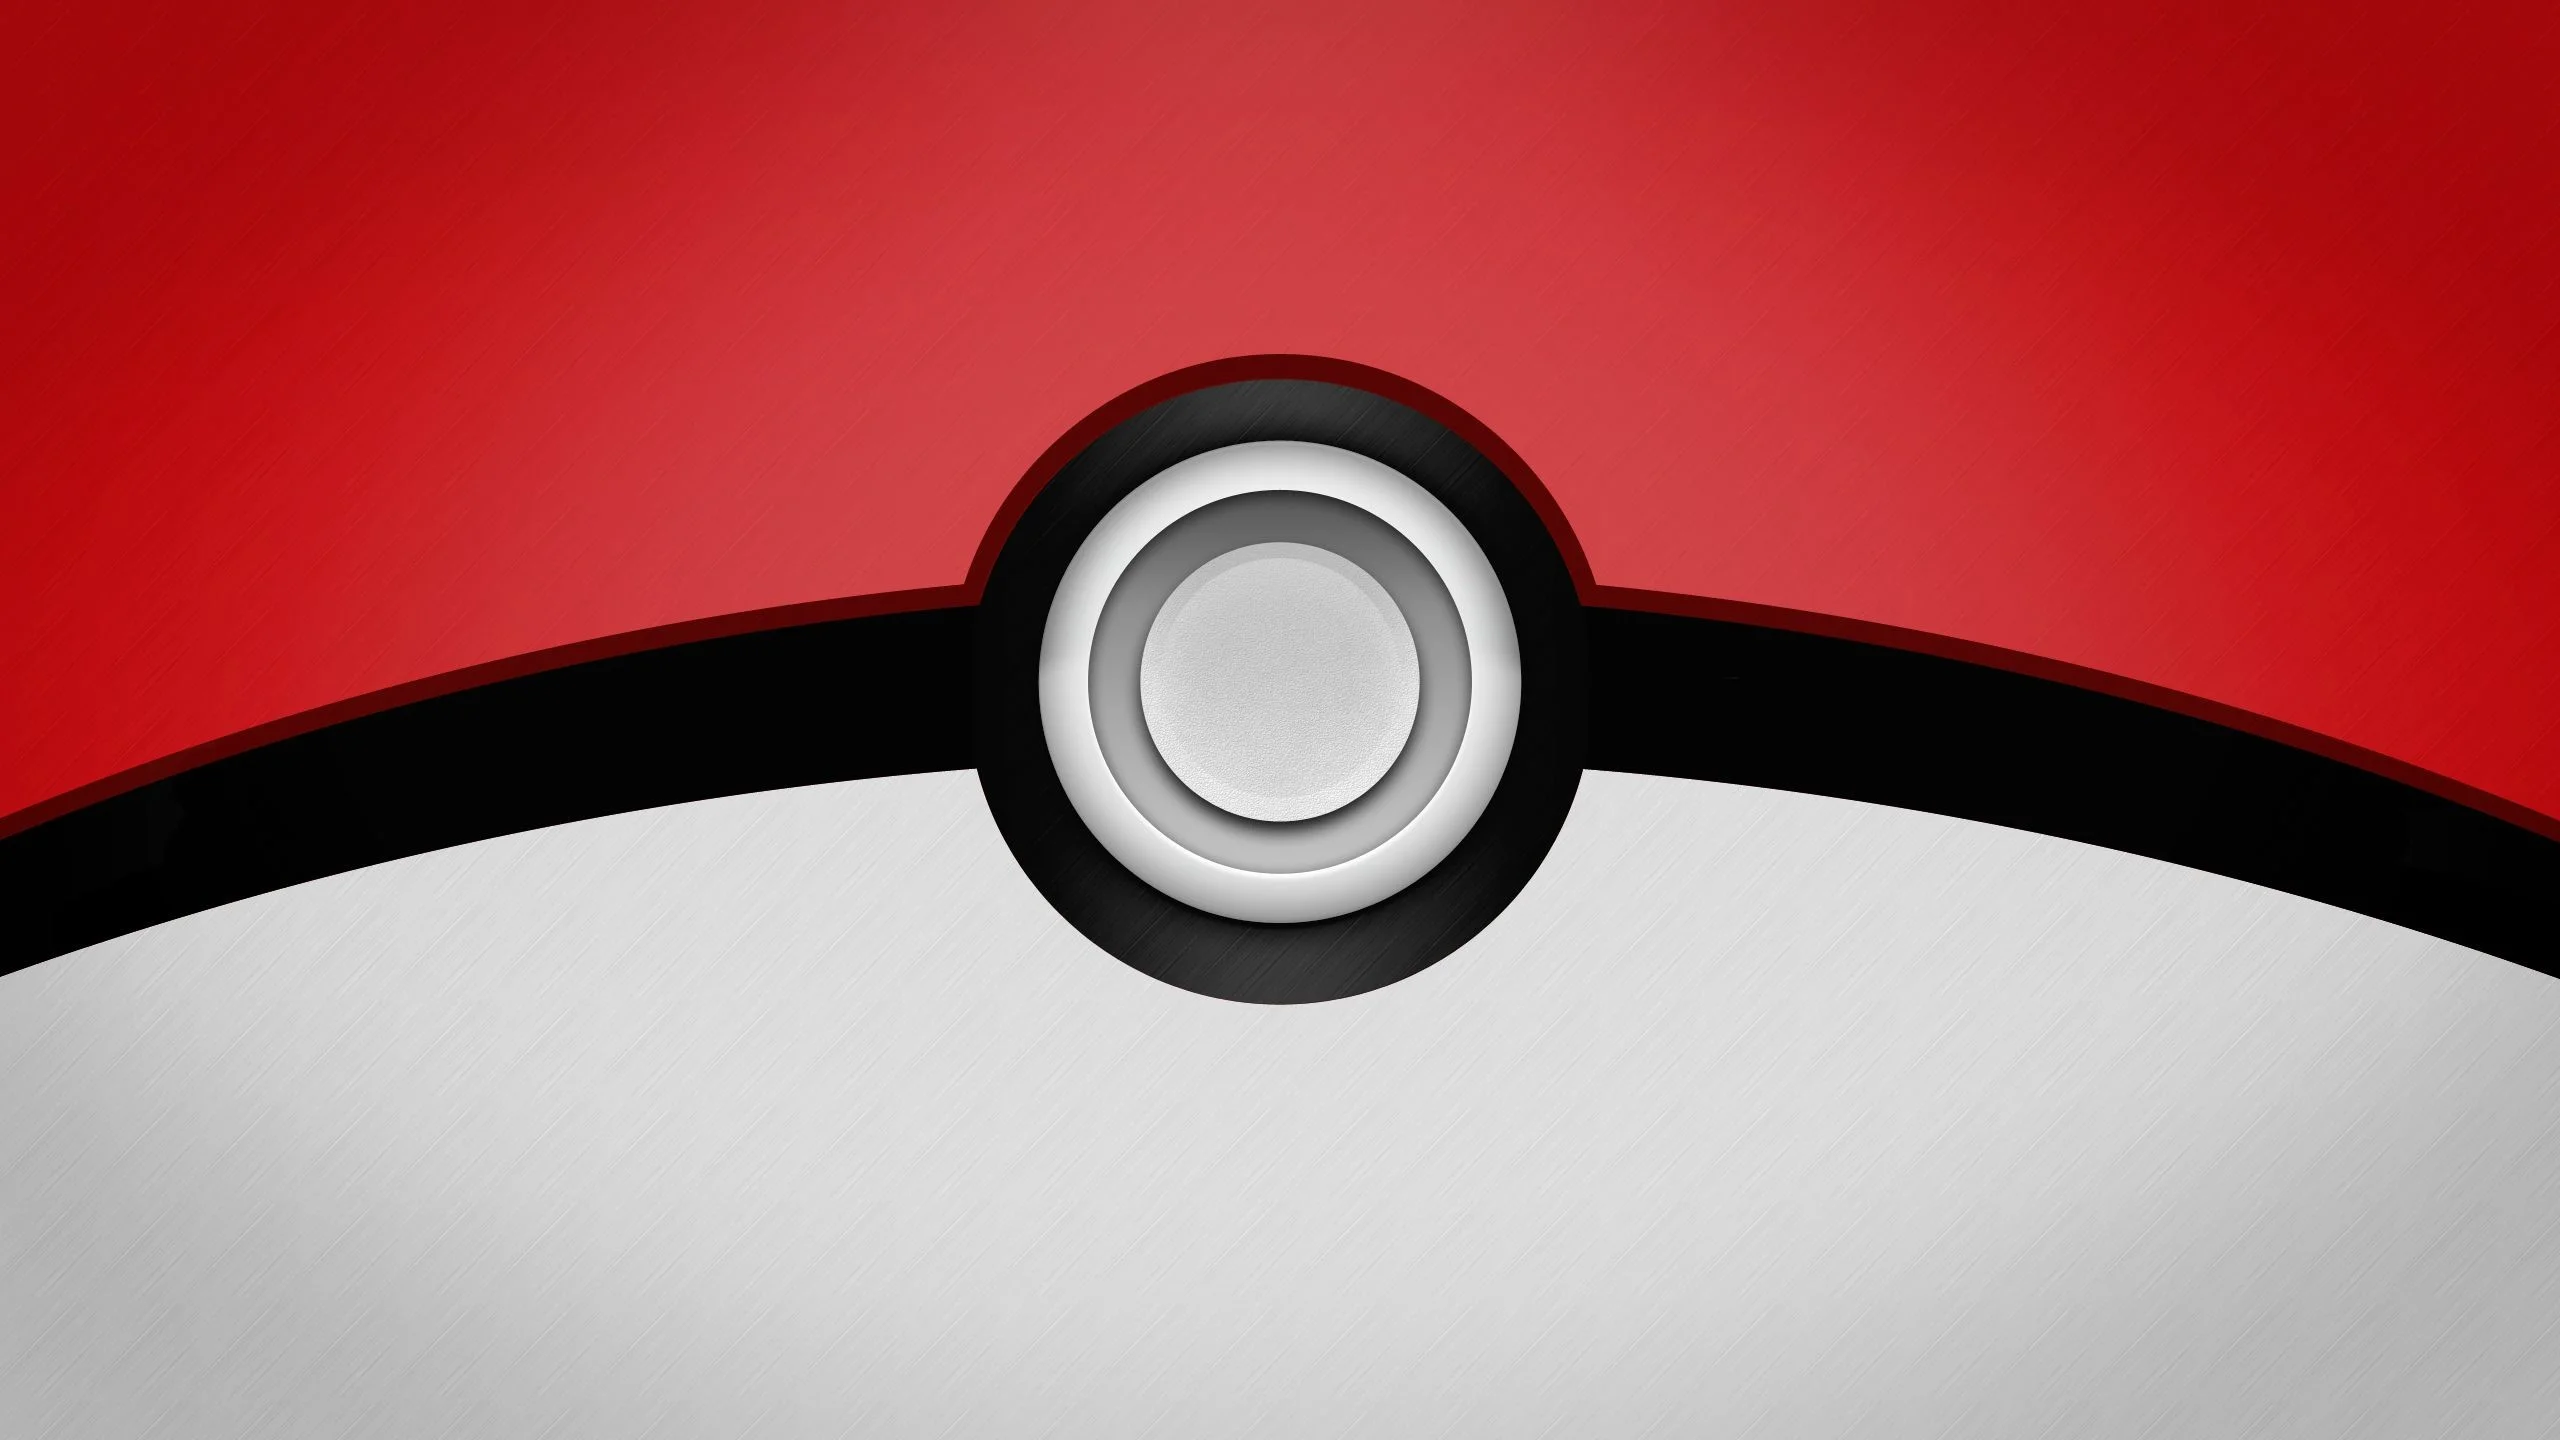 Made this pokeball wallpaper available to download. (X-post from /r/gaming)  …